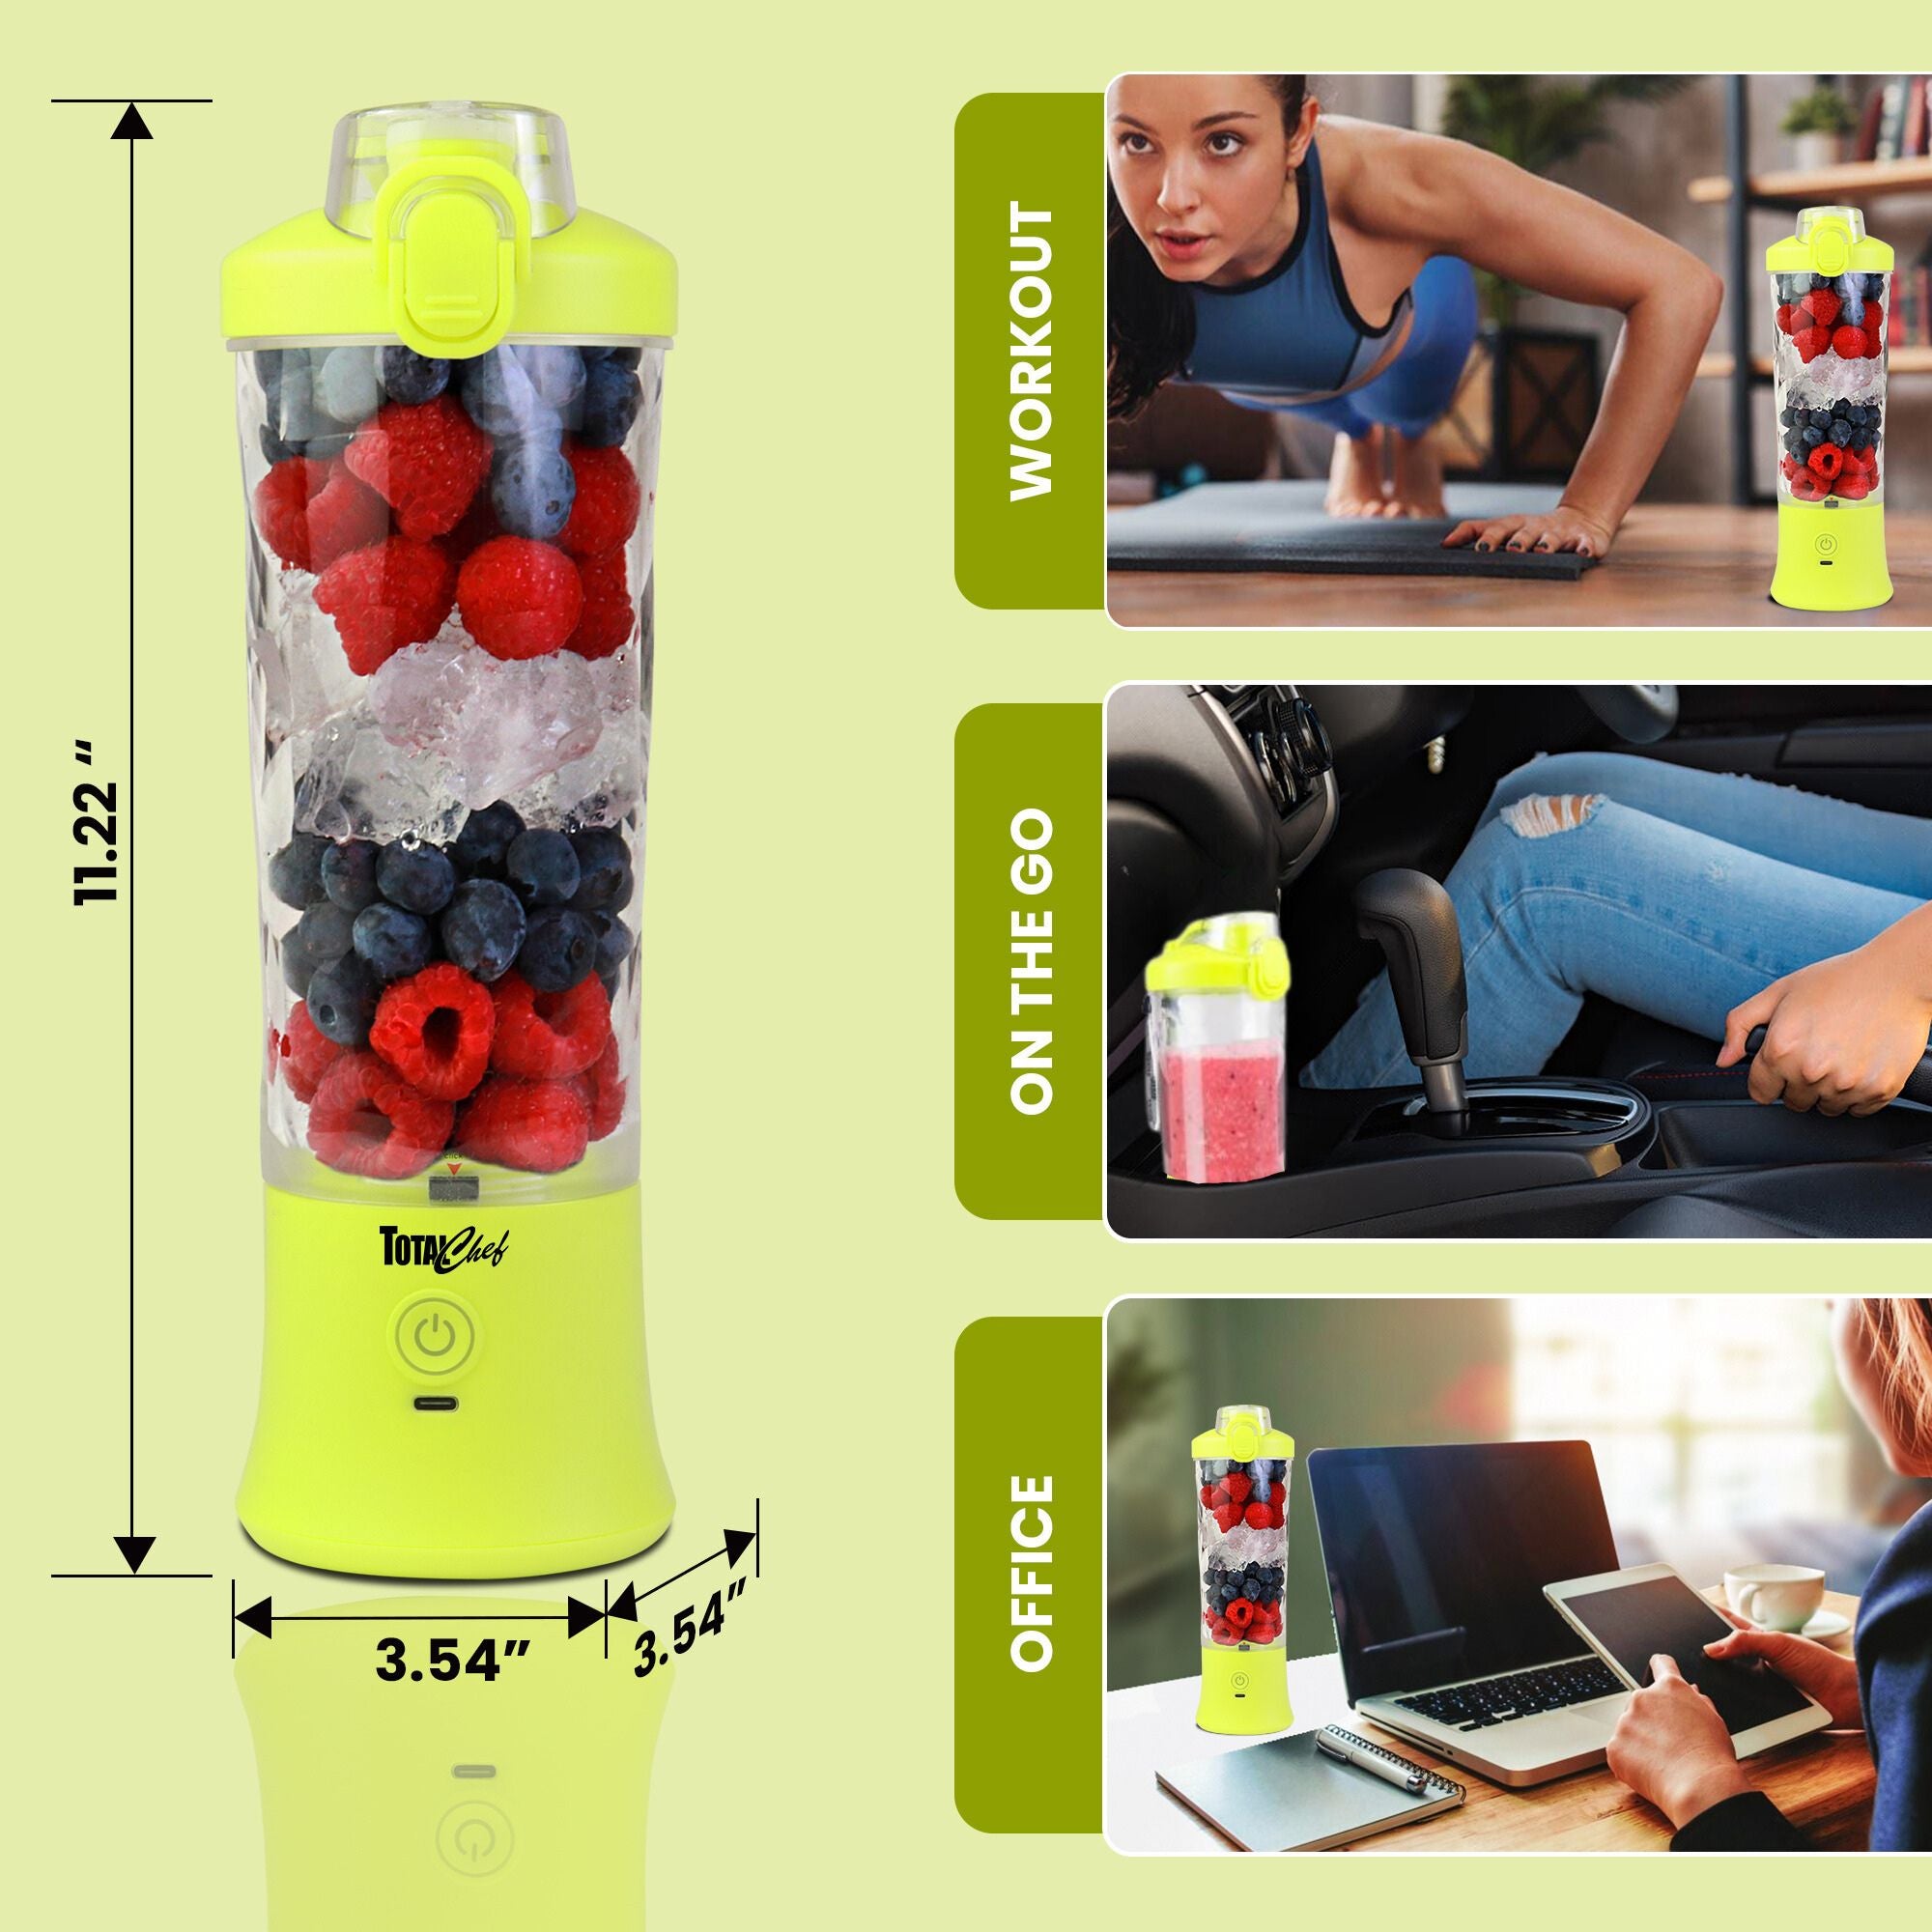 On the left is a product shot of the Total Chef portable blender filled with strawberries, blueberries, and ice cubes on pale green background with dimensions labeled. Three inset images on the right show settings where you could use the blender, labeled: Workout; on the go; and office.